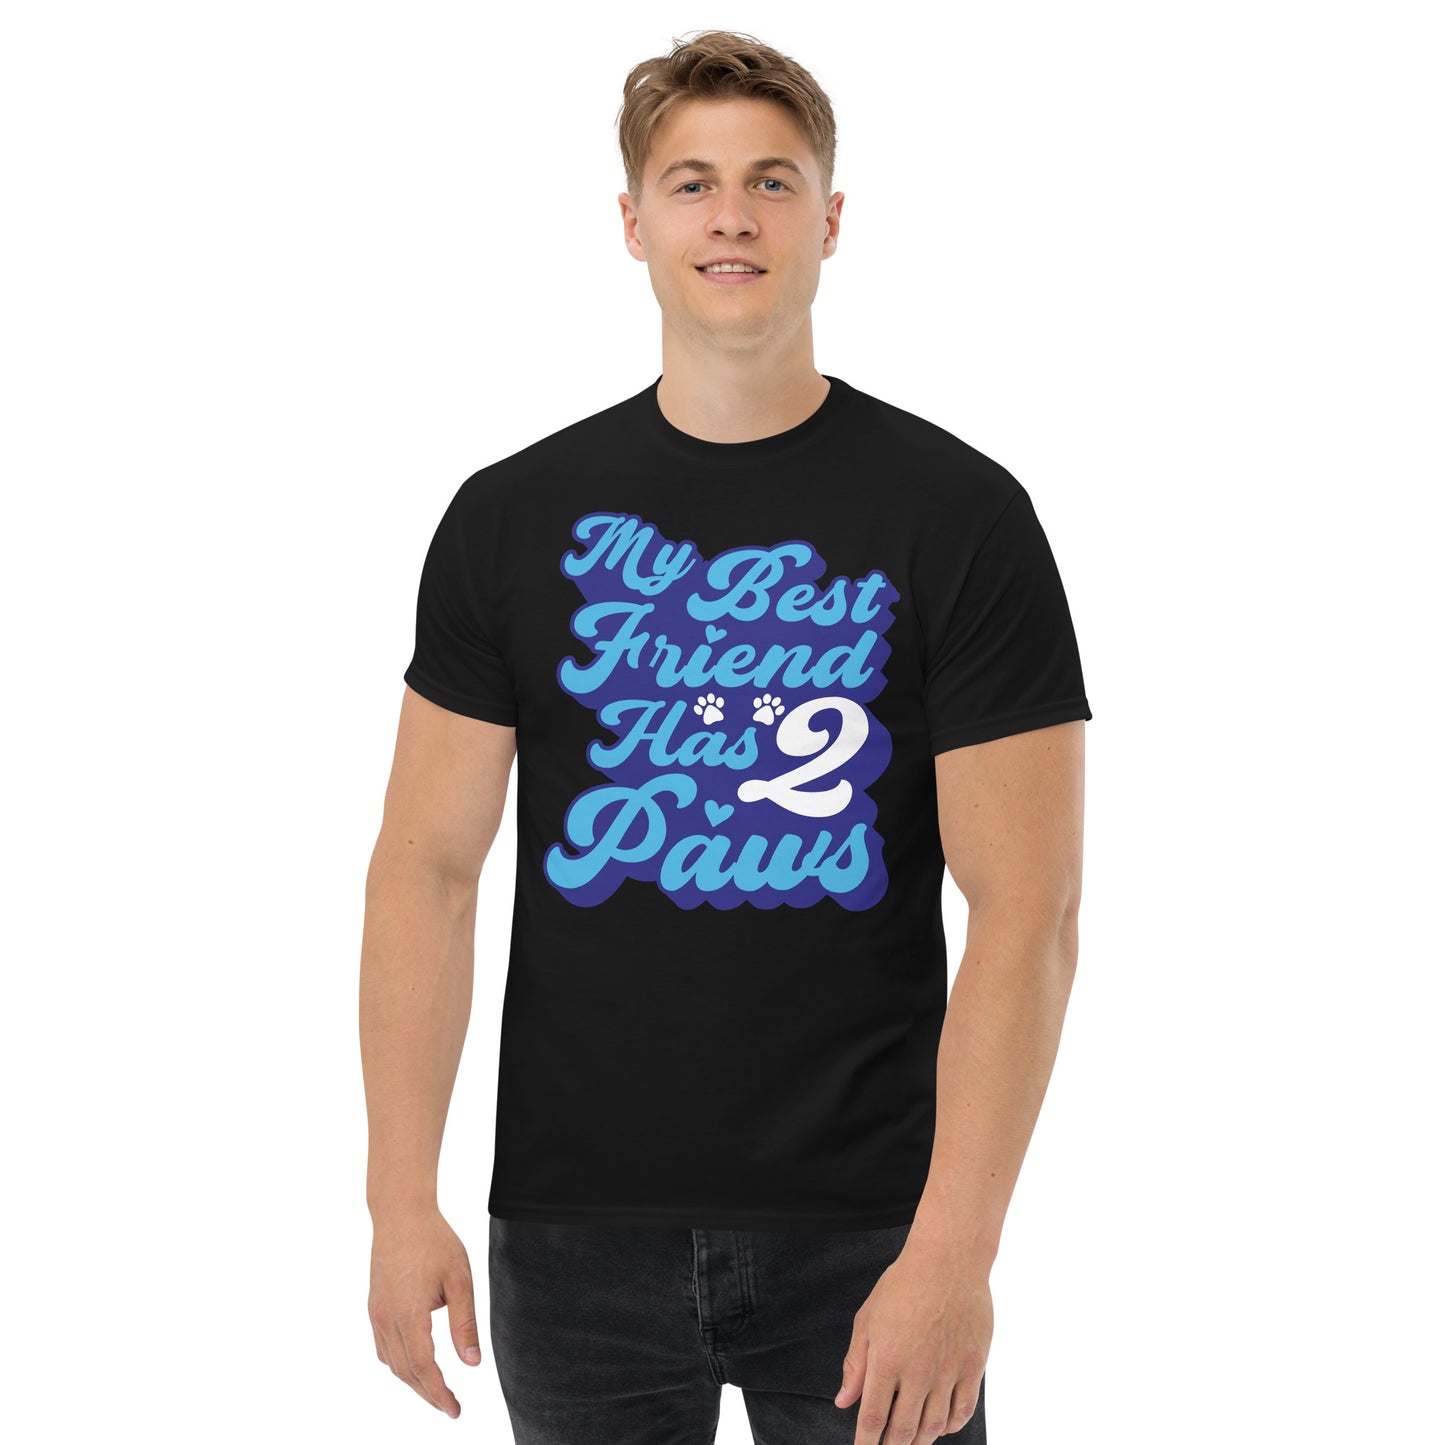 My best friend has 2 Paws men’s t-shirts by Dog Artistry black